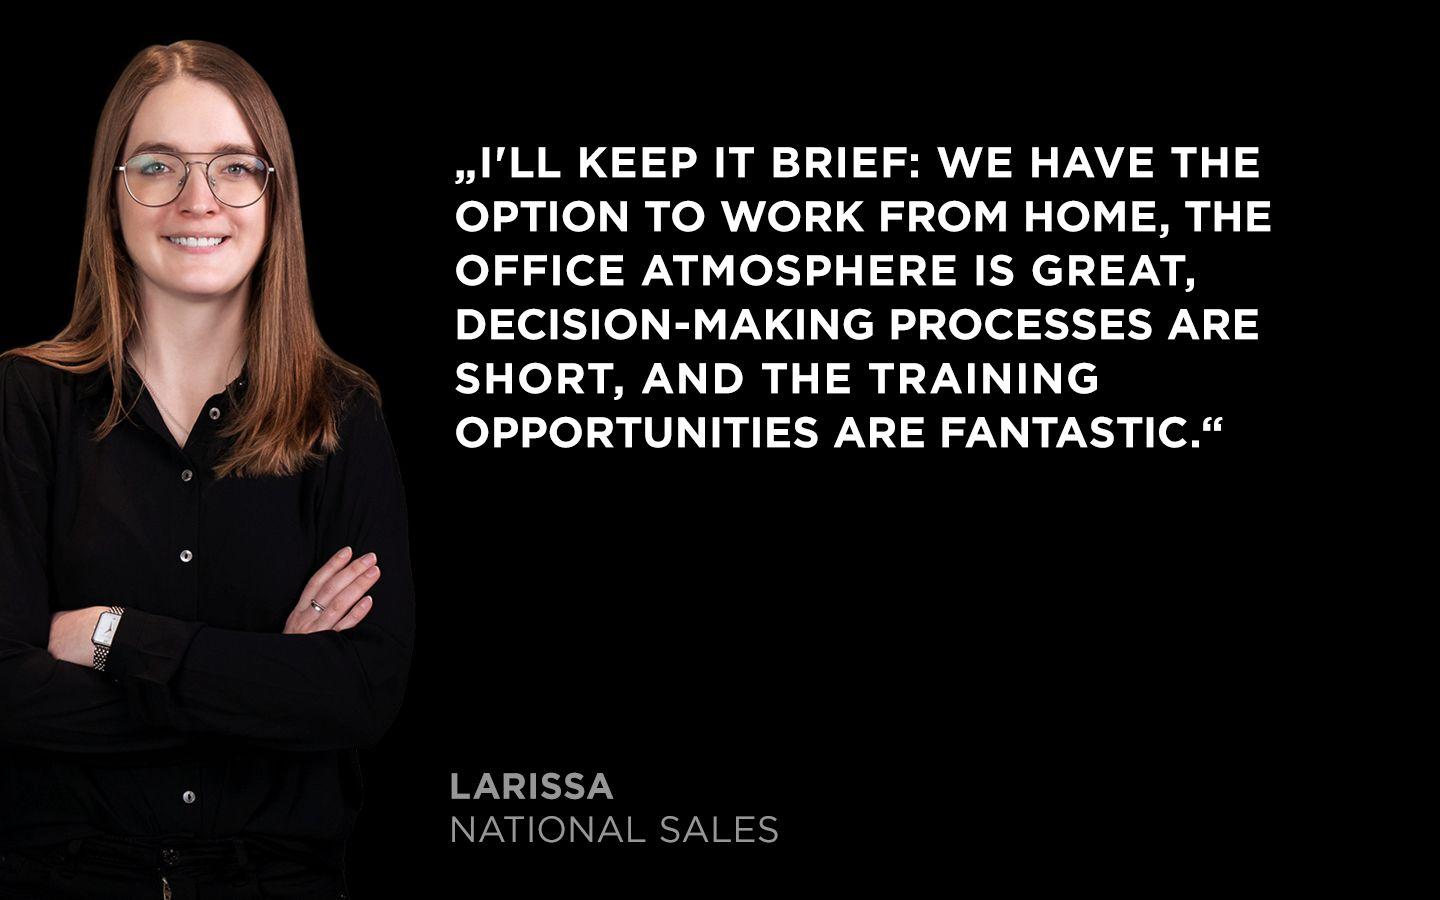 Quote from Larissa from the National Sales team: "WAS Germany offers me the option to work from home, a great working atmosphere, short decision-making processes and fantastic training opportunities.